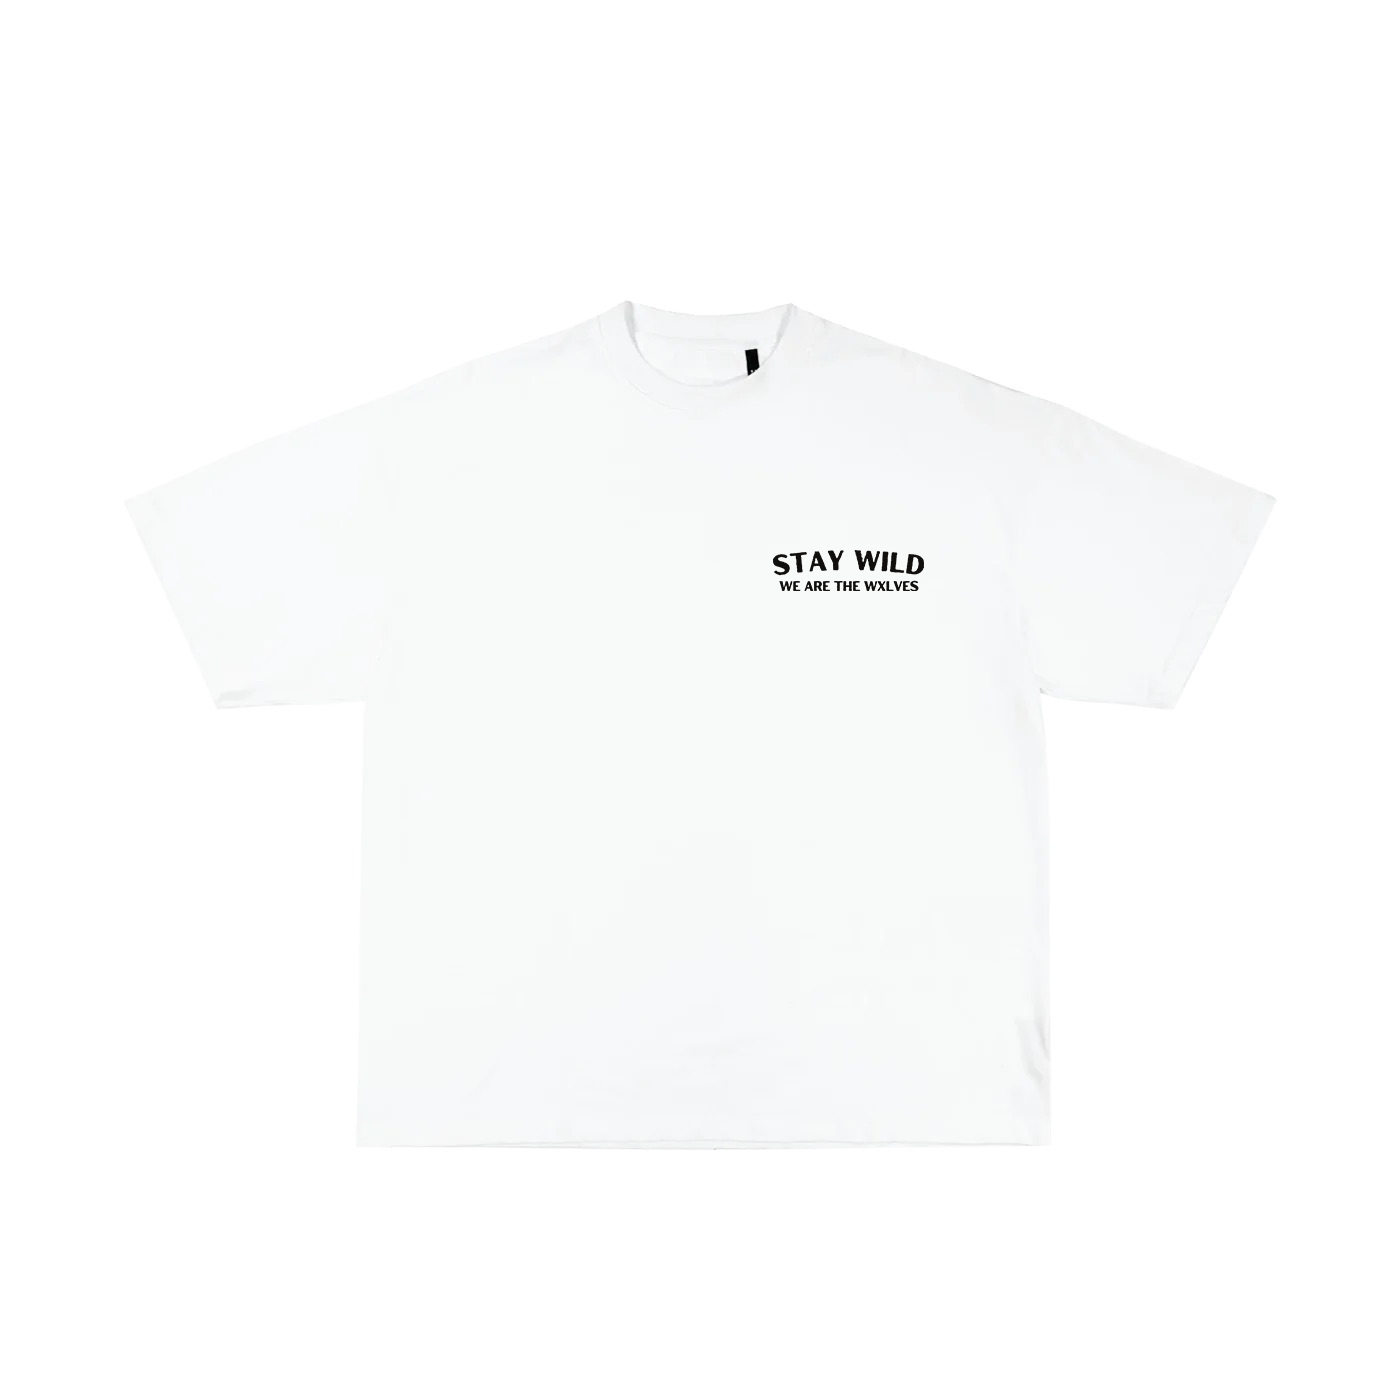 The Stay Wild Tee